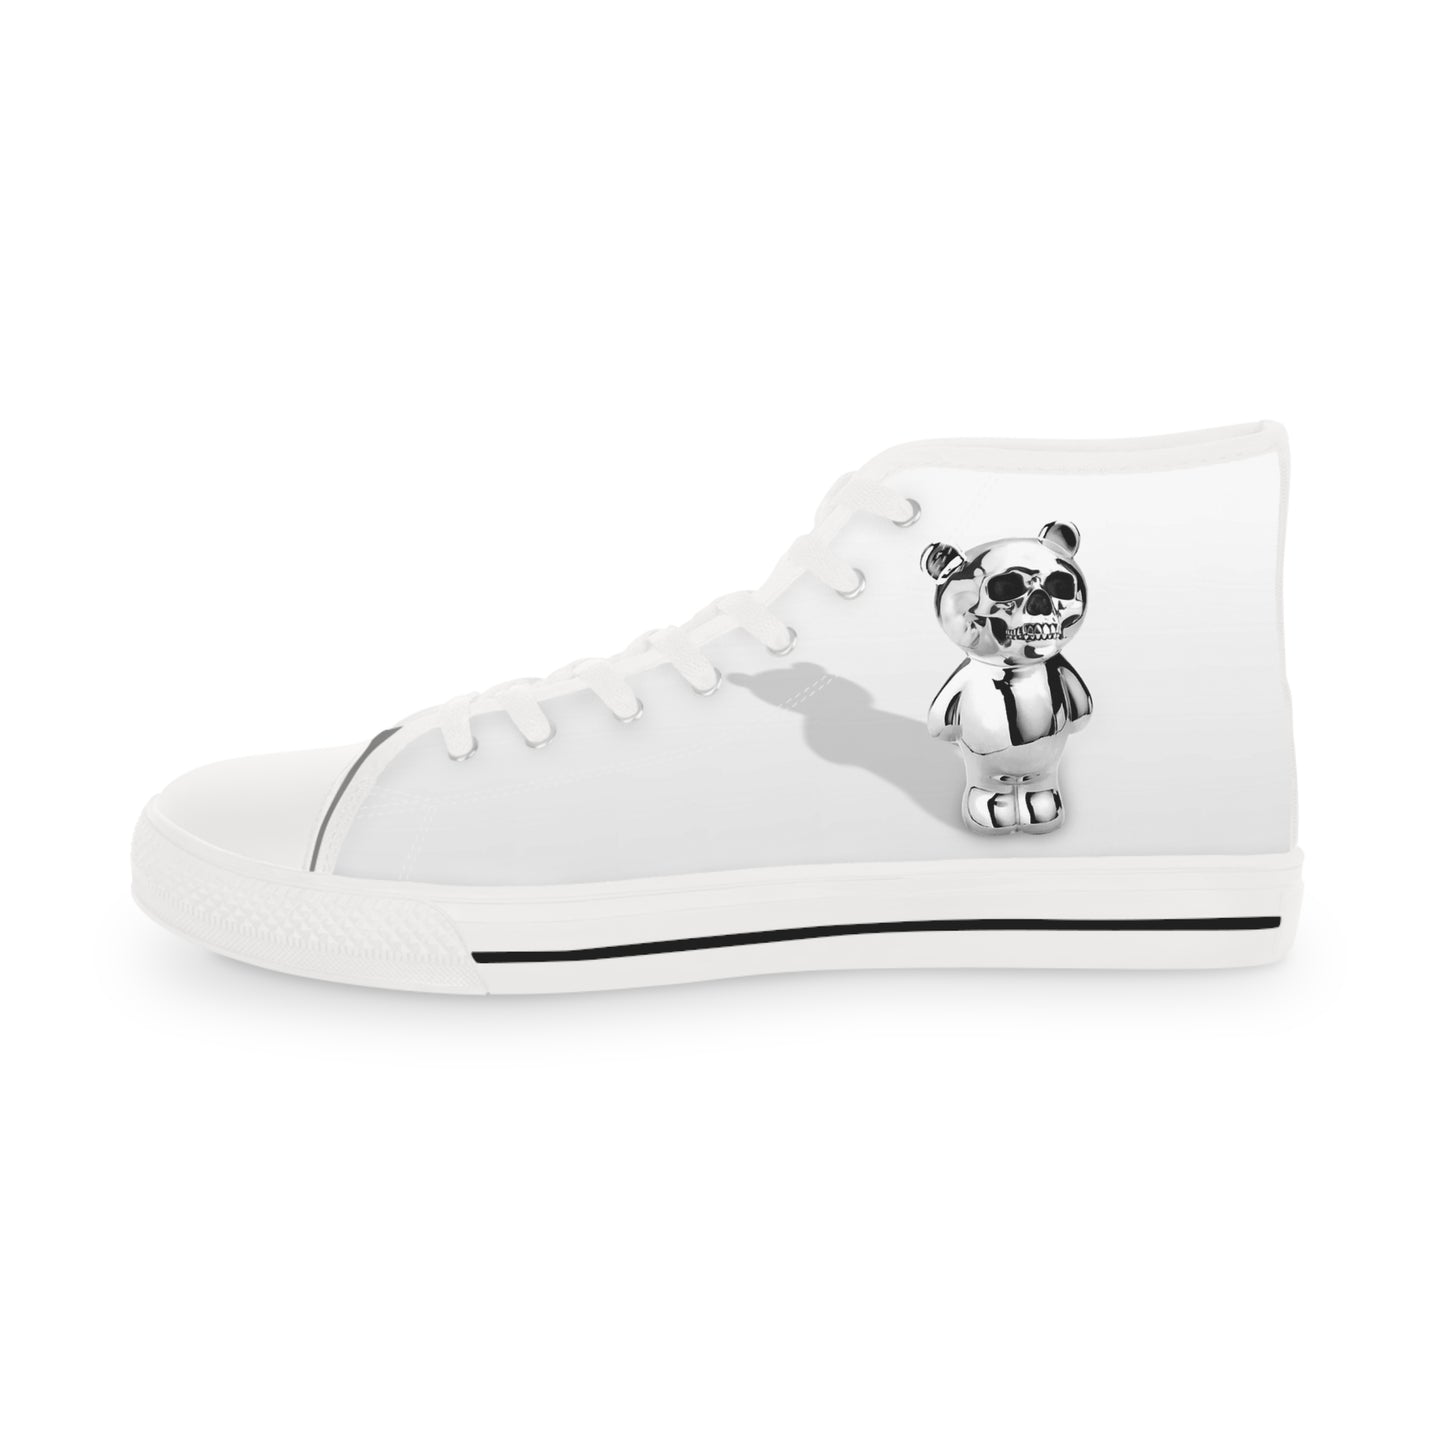 Men's Custom Canvas High Top Sneakers - Teddy US 14 White sole